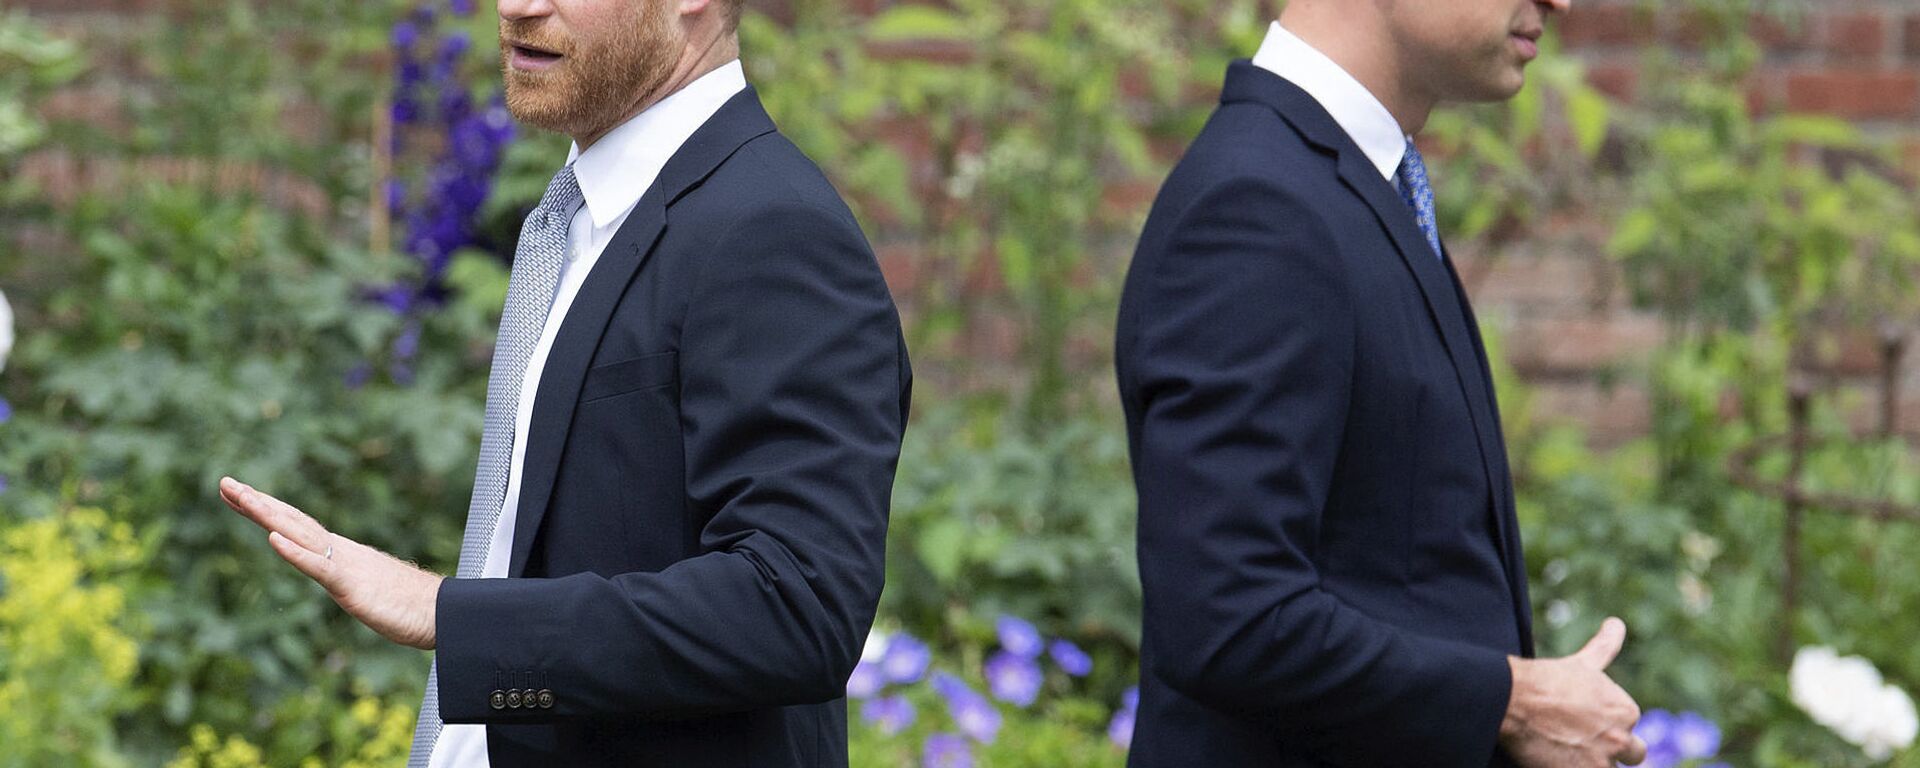 Prince Harry, left, and Prince William stand together during the unveiling of a statue they commissioned of their mother Princess Diana, on what woud have been her 60th birthday, in the Sunken Garden at Kensington Palace, London, Thursday July 1, 2021 - Sputnik International, 1920, 21.12.2021